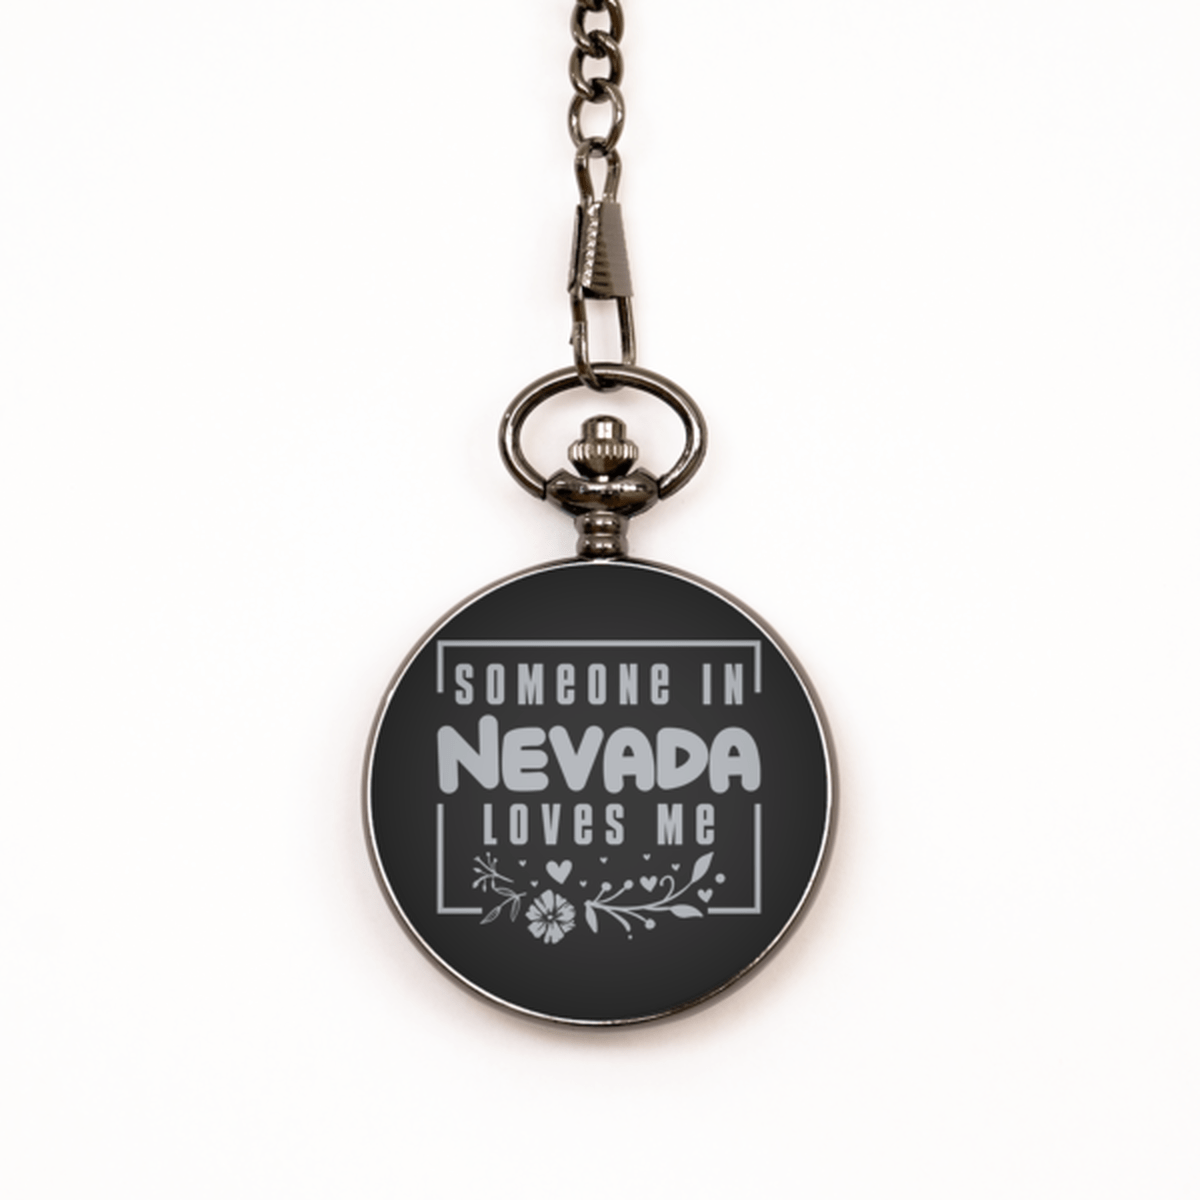 Cute Nevada Black Pocket Watch, Someone in Nevada Loves Me, Best Birthday Gifts from Nevada Friends & Family